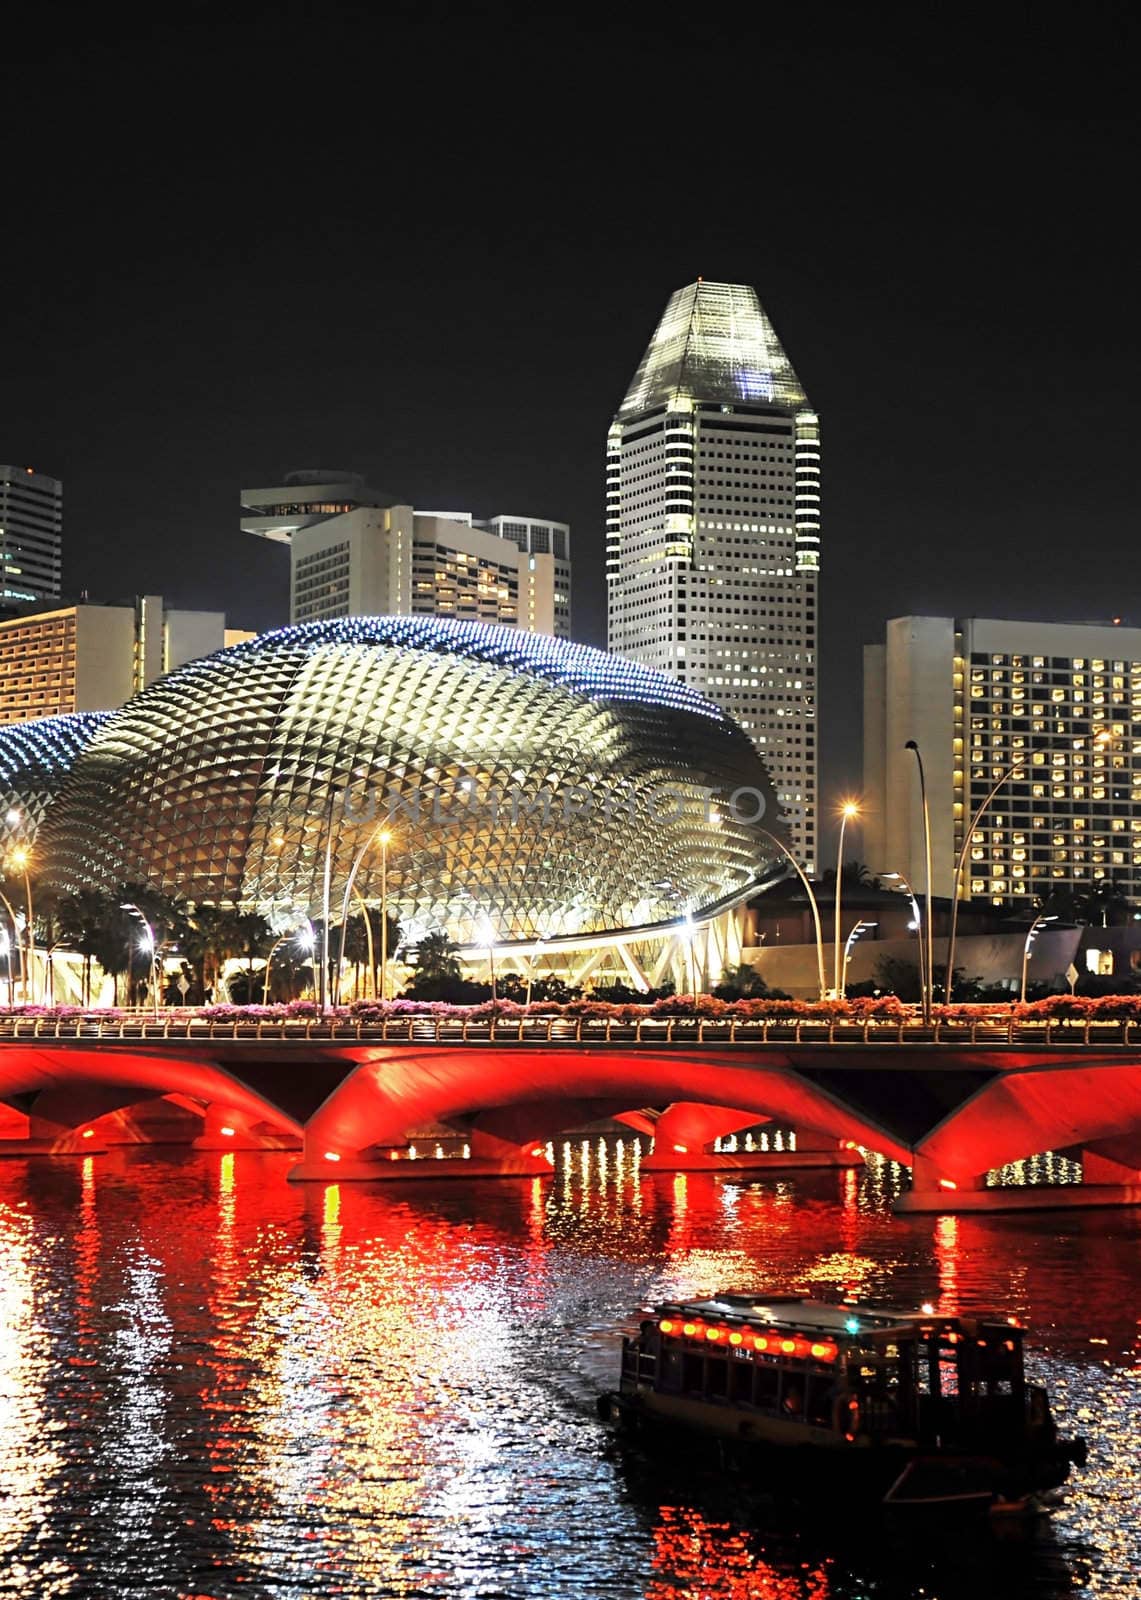 Esplanade theater  is a modern building for musical,art gallery and concert located at riverside near Singapore Flyer.